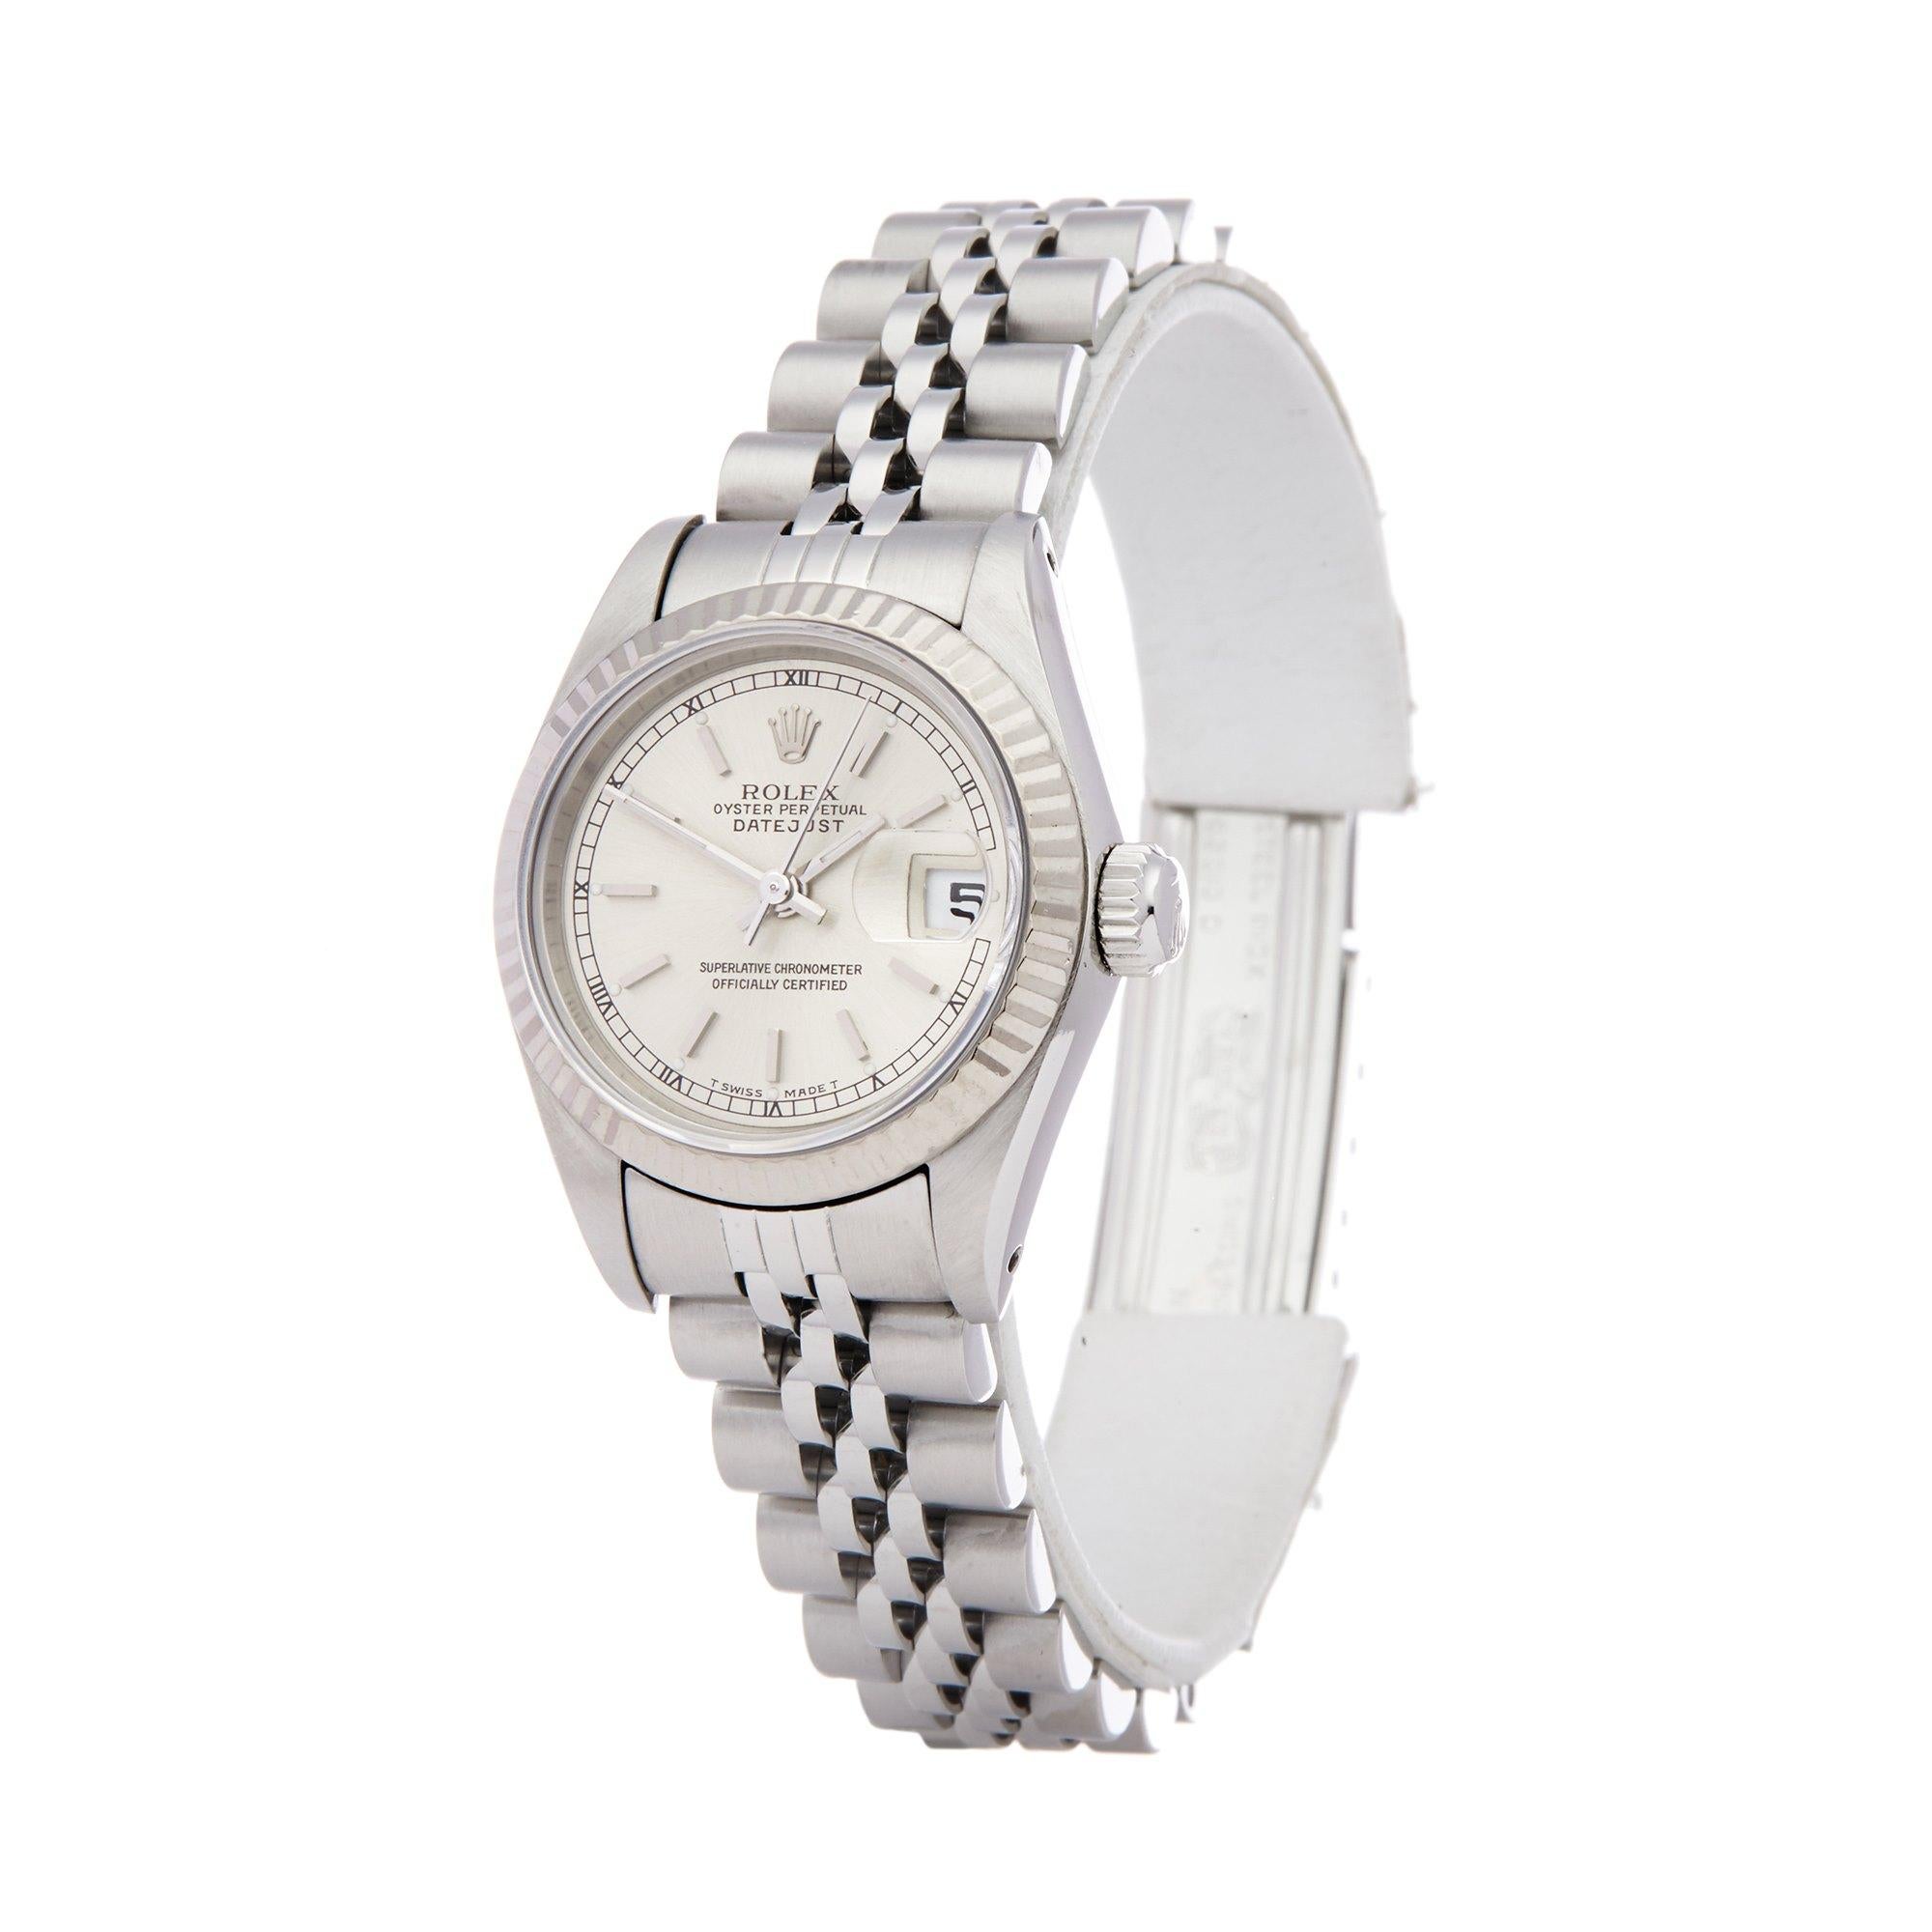 Xupes Reference: W007441
Manufacturer: Rolex
Model: Datejust
Model Variant: 26
Model Number: 69174
Age: 1989
Gender: Ladies
Complete With: Rolex Box
Dial: Silver Baton
Glass: Sapphire Crystal
Case Size: 26mm
Case Material: Stainless Steel
Strap